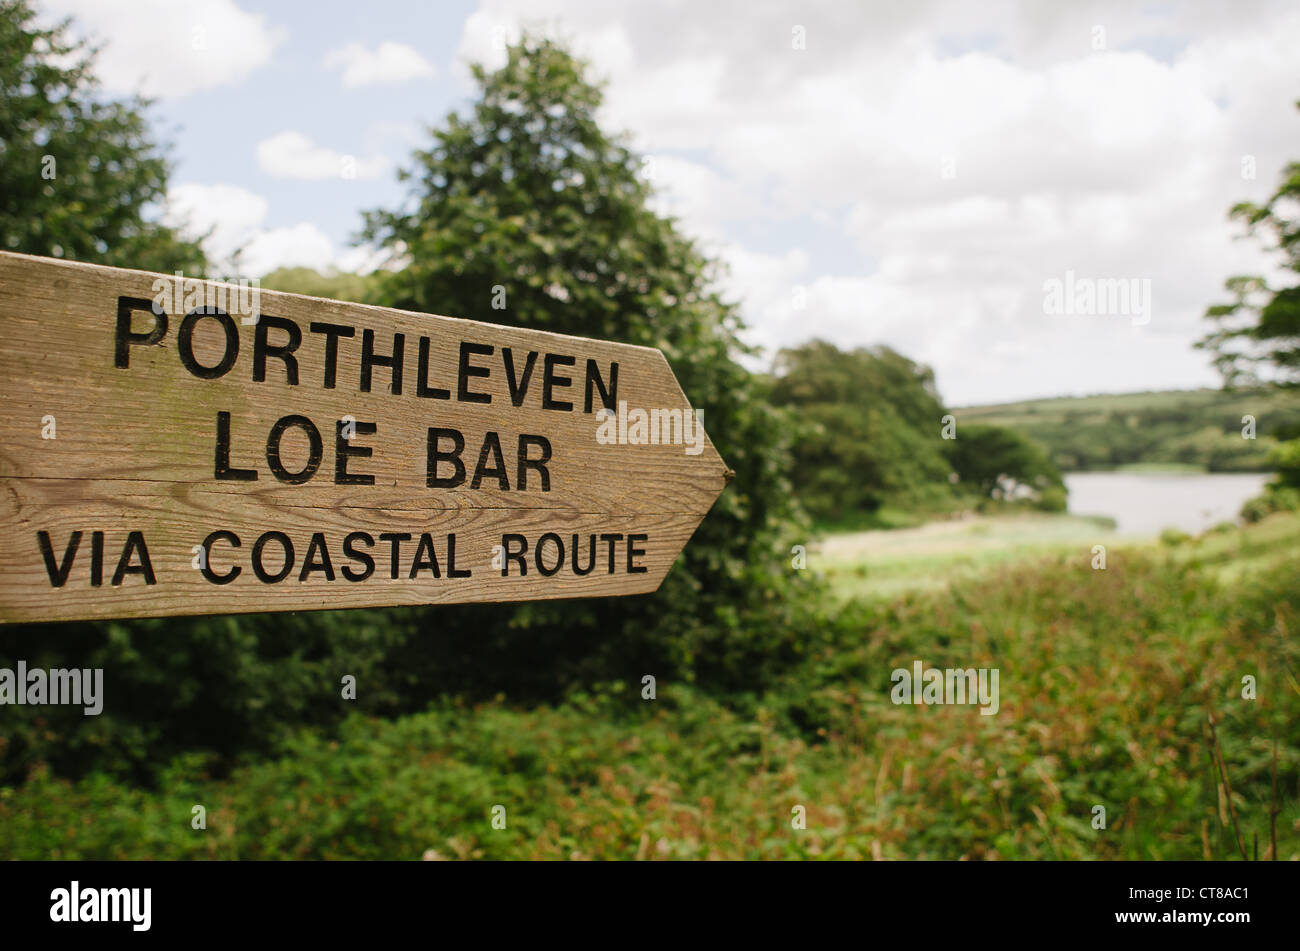 A wooden sign with directions for Porthleven and Loe Bar, Cornwall located in the Penrose Estate on an overcast day with Loe Pool in the background Stock Photo